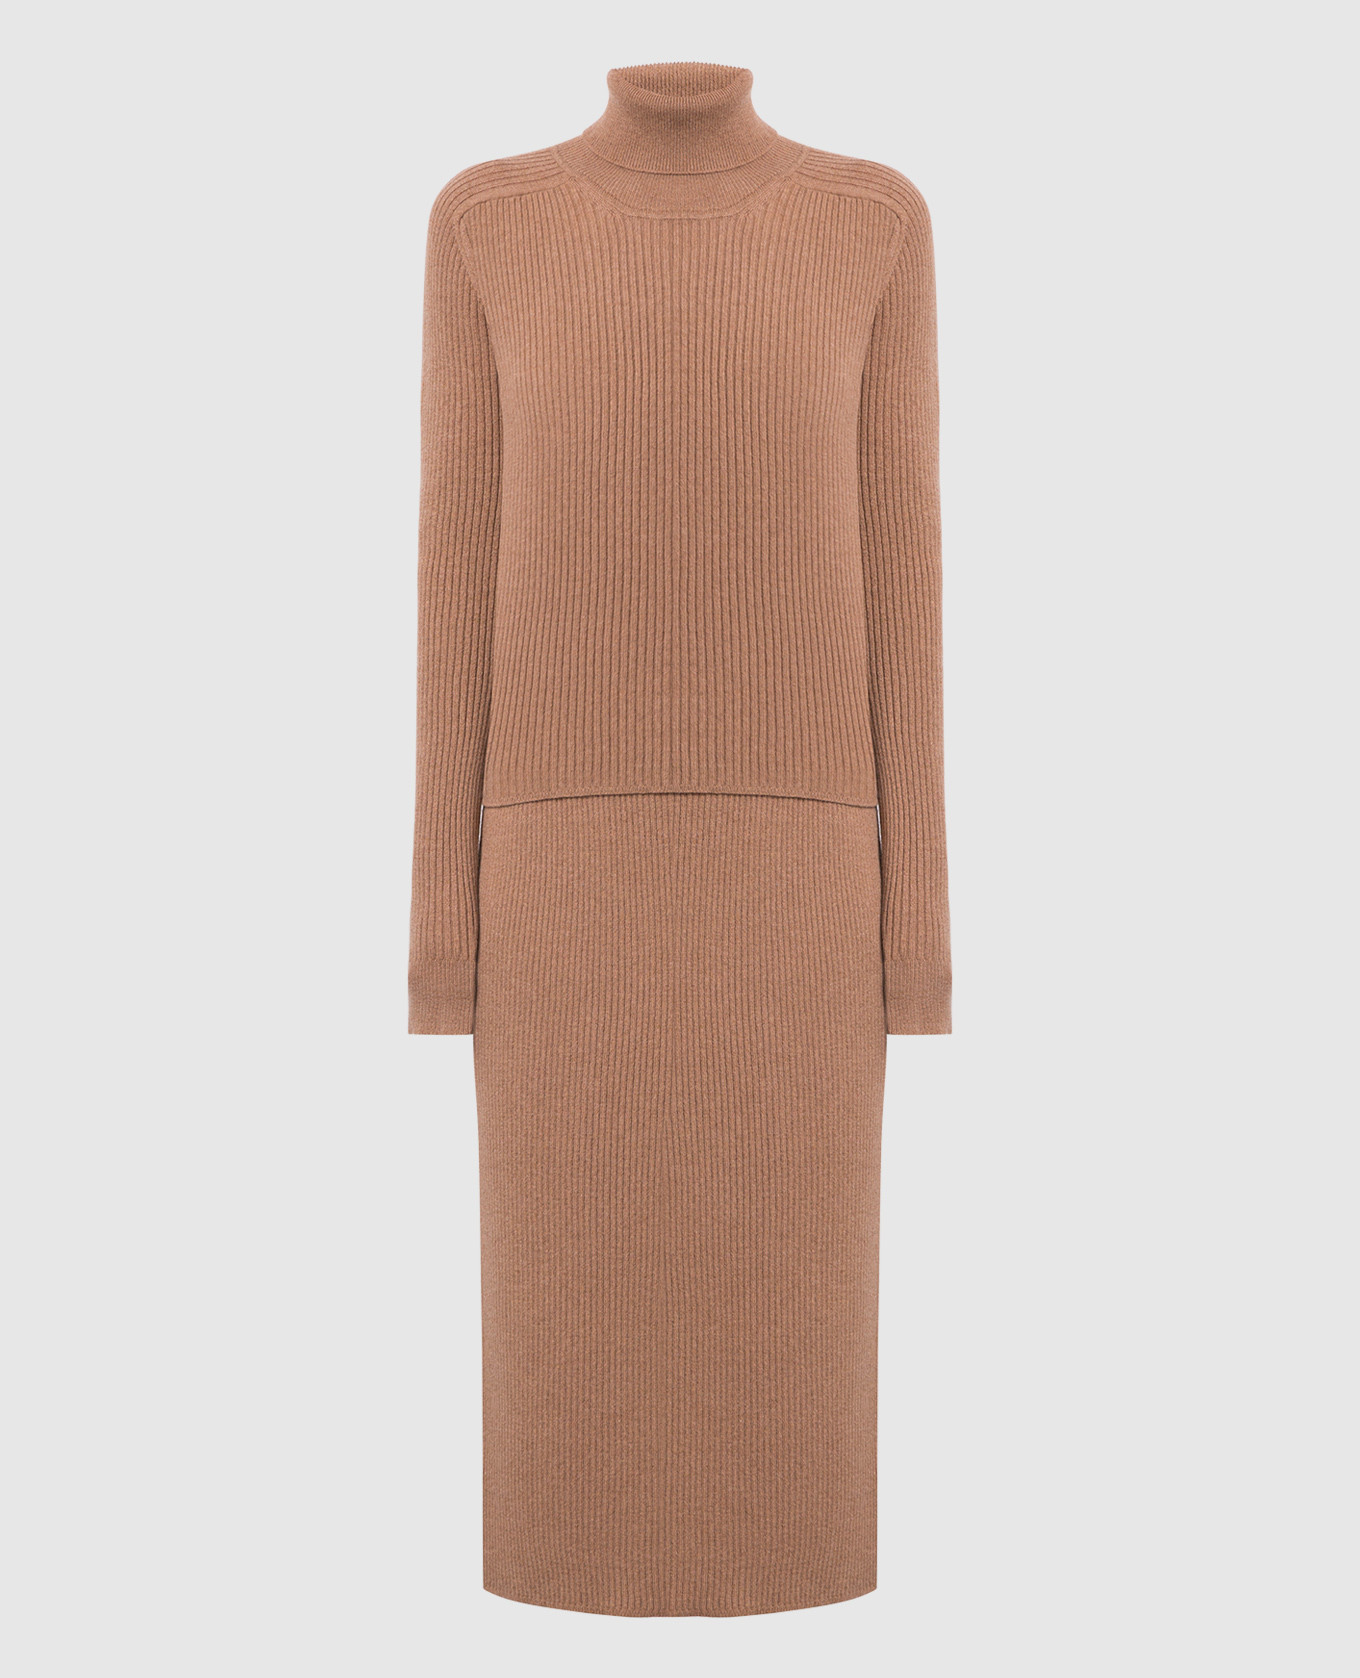 Brown cashmere sweater and skirt suit